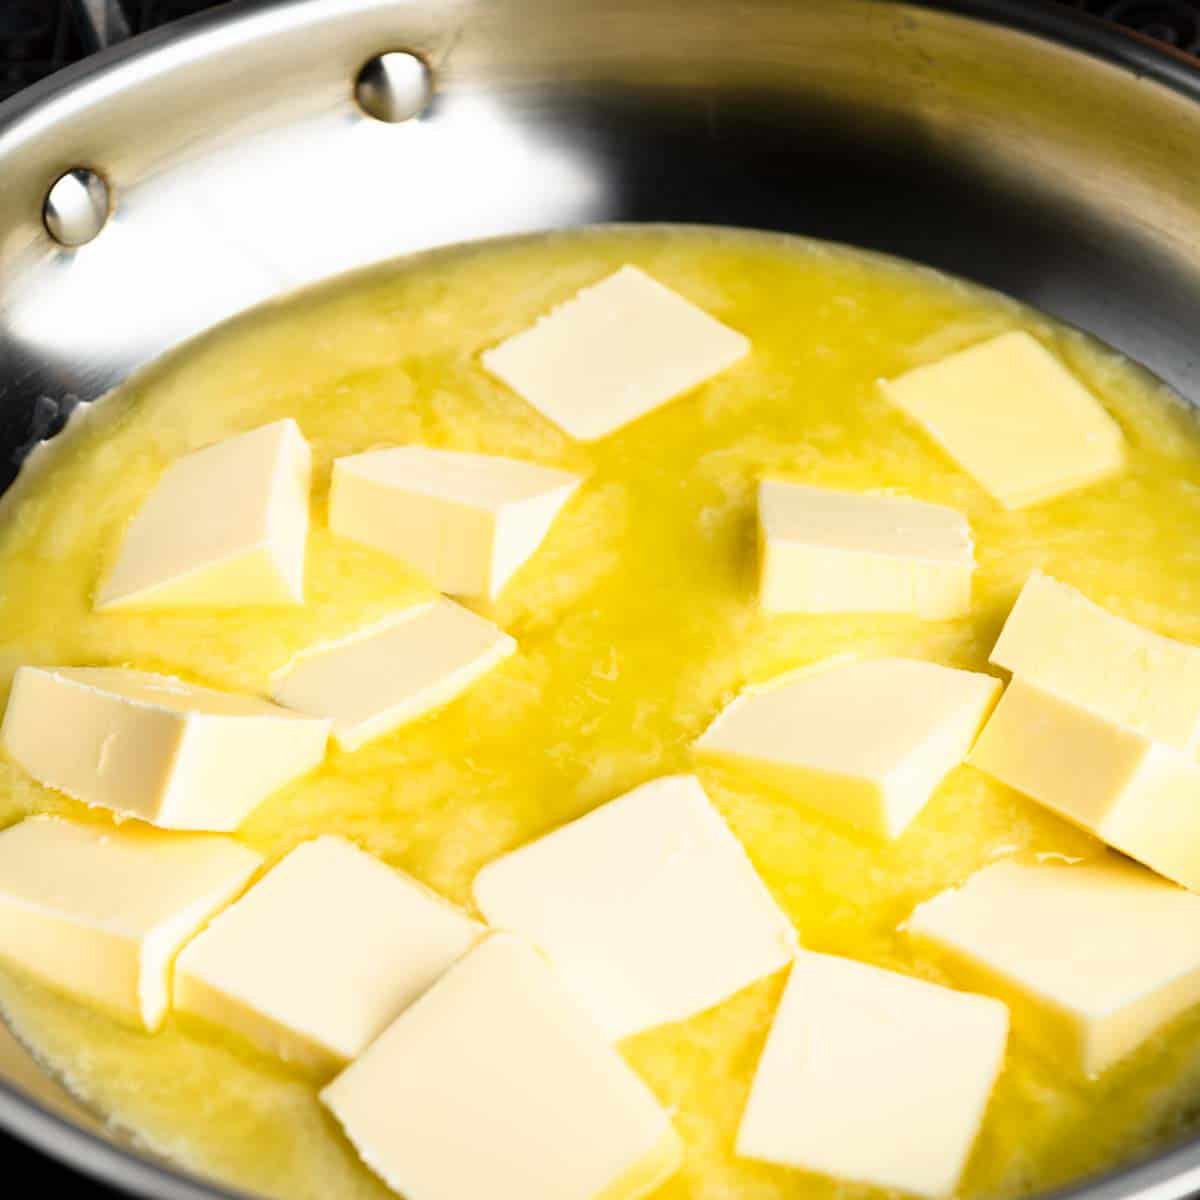 Tablespoons of butter melting in a stainless steel pan